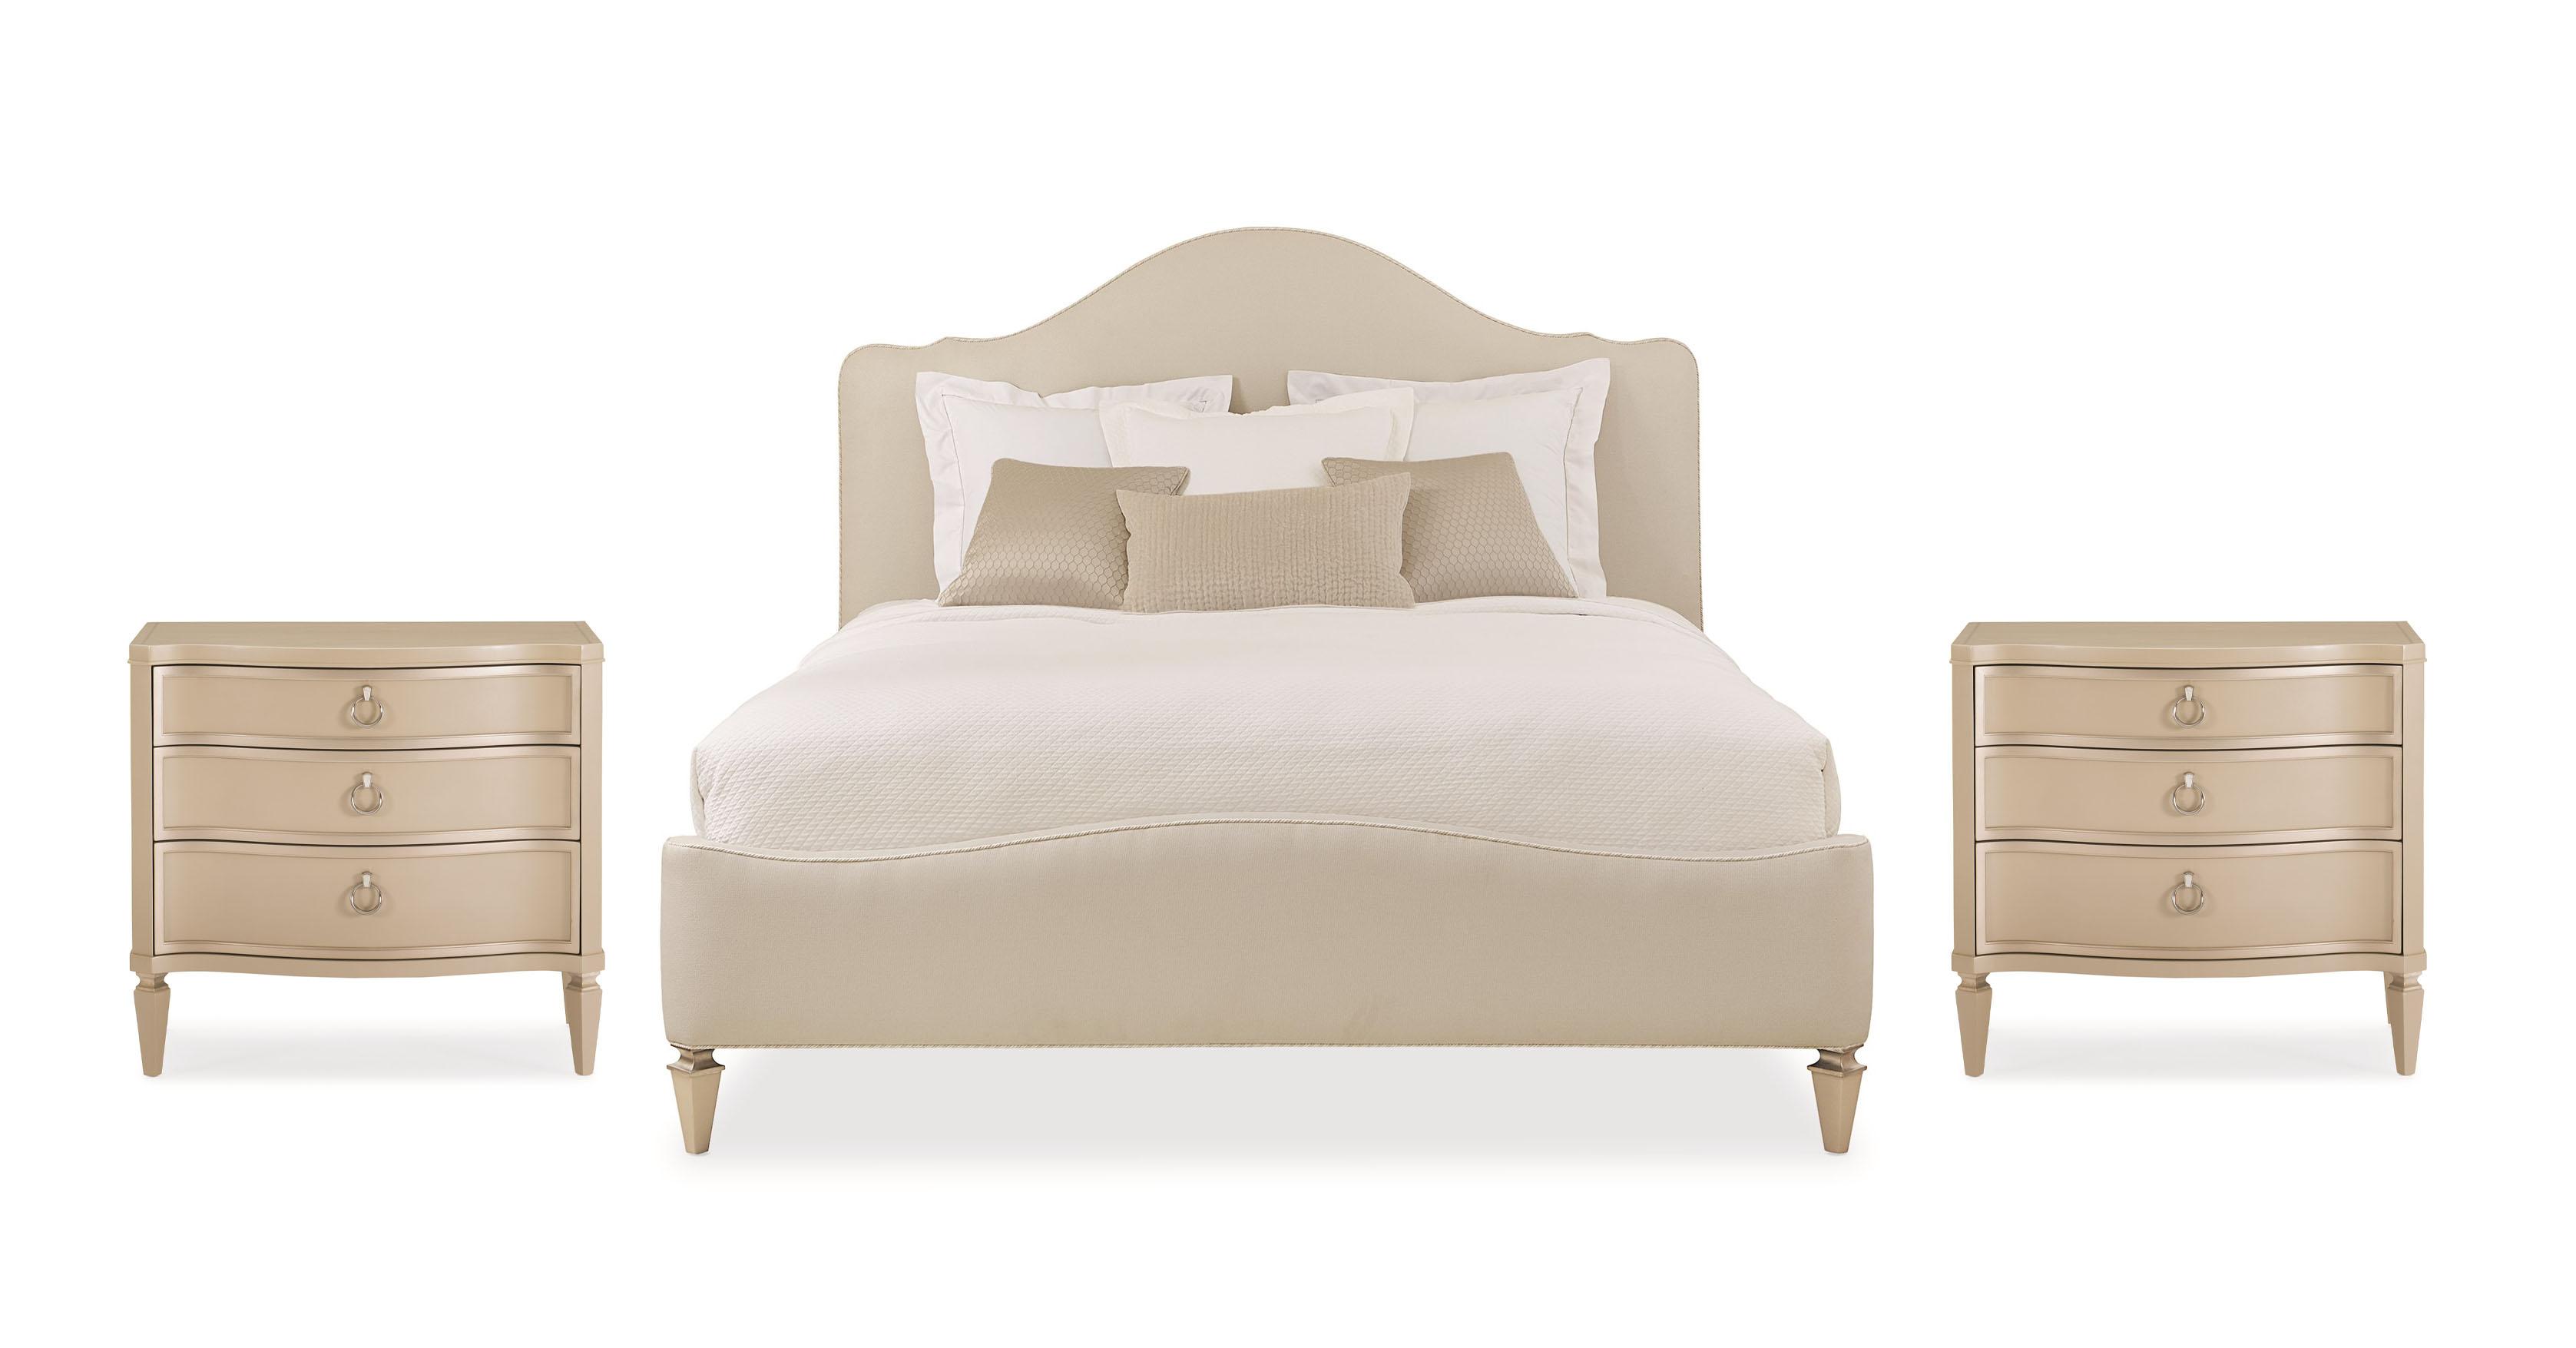 

    
Cream Finish Camel-Back Headboard Queen Bed Set 3Pcs A NIGHT IN PARIS / NEXT TO ME by Caracole
